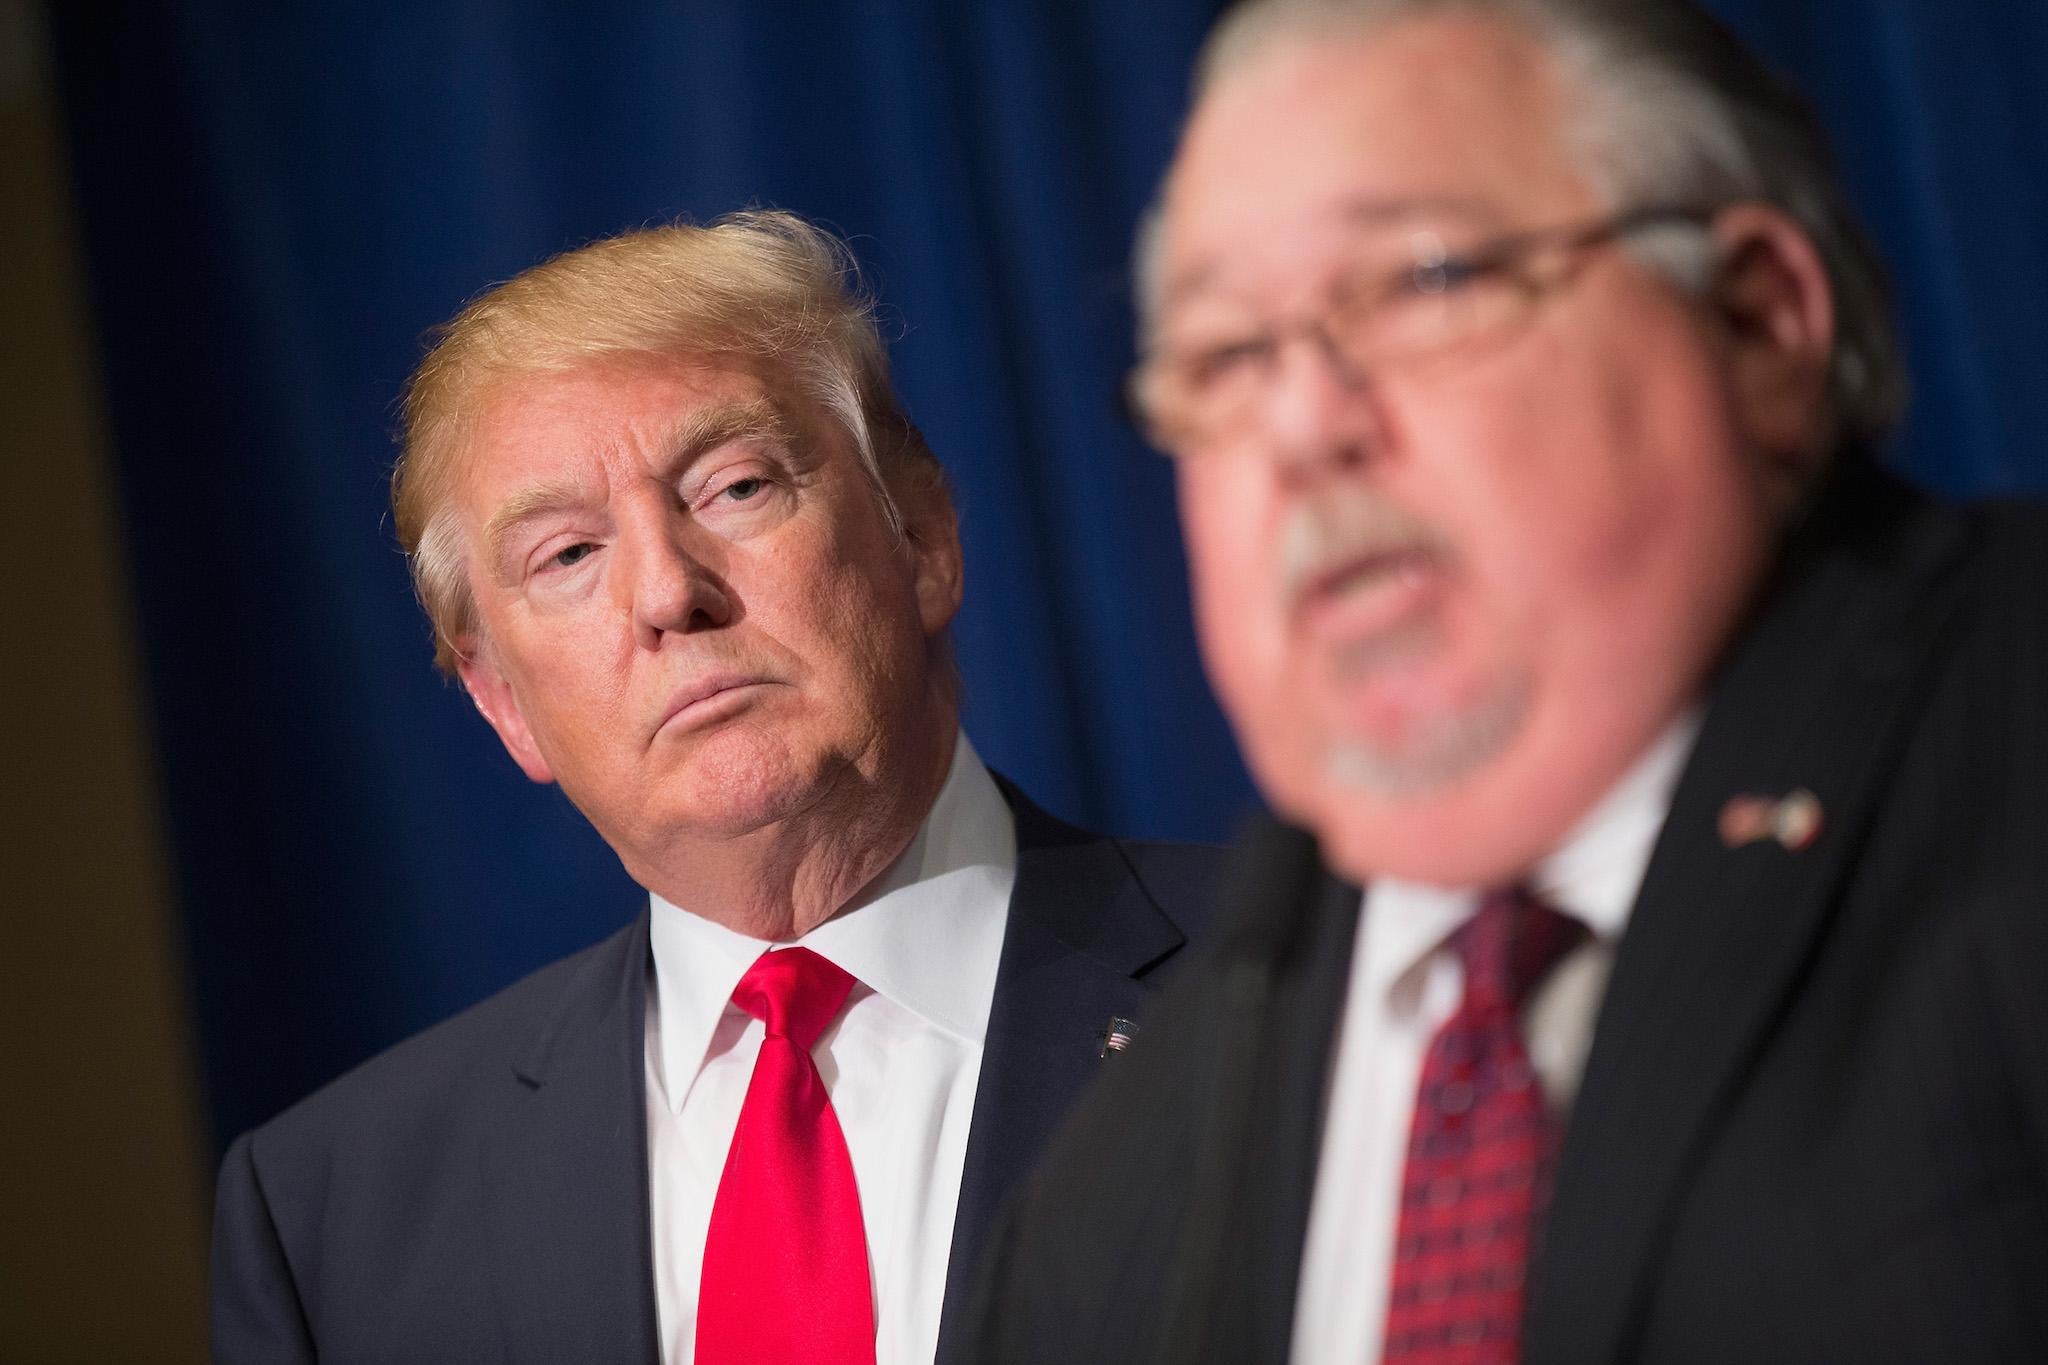 Republican presidential candidate Donald Trump listens as Sam Clovis speaks at a press conference